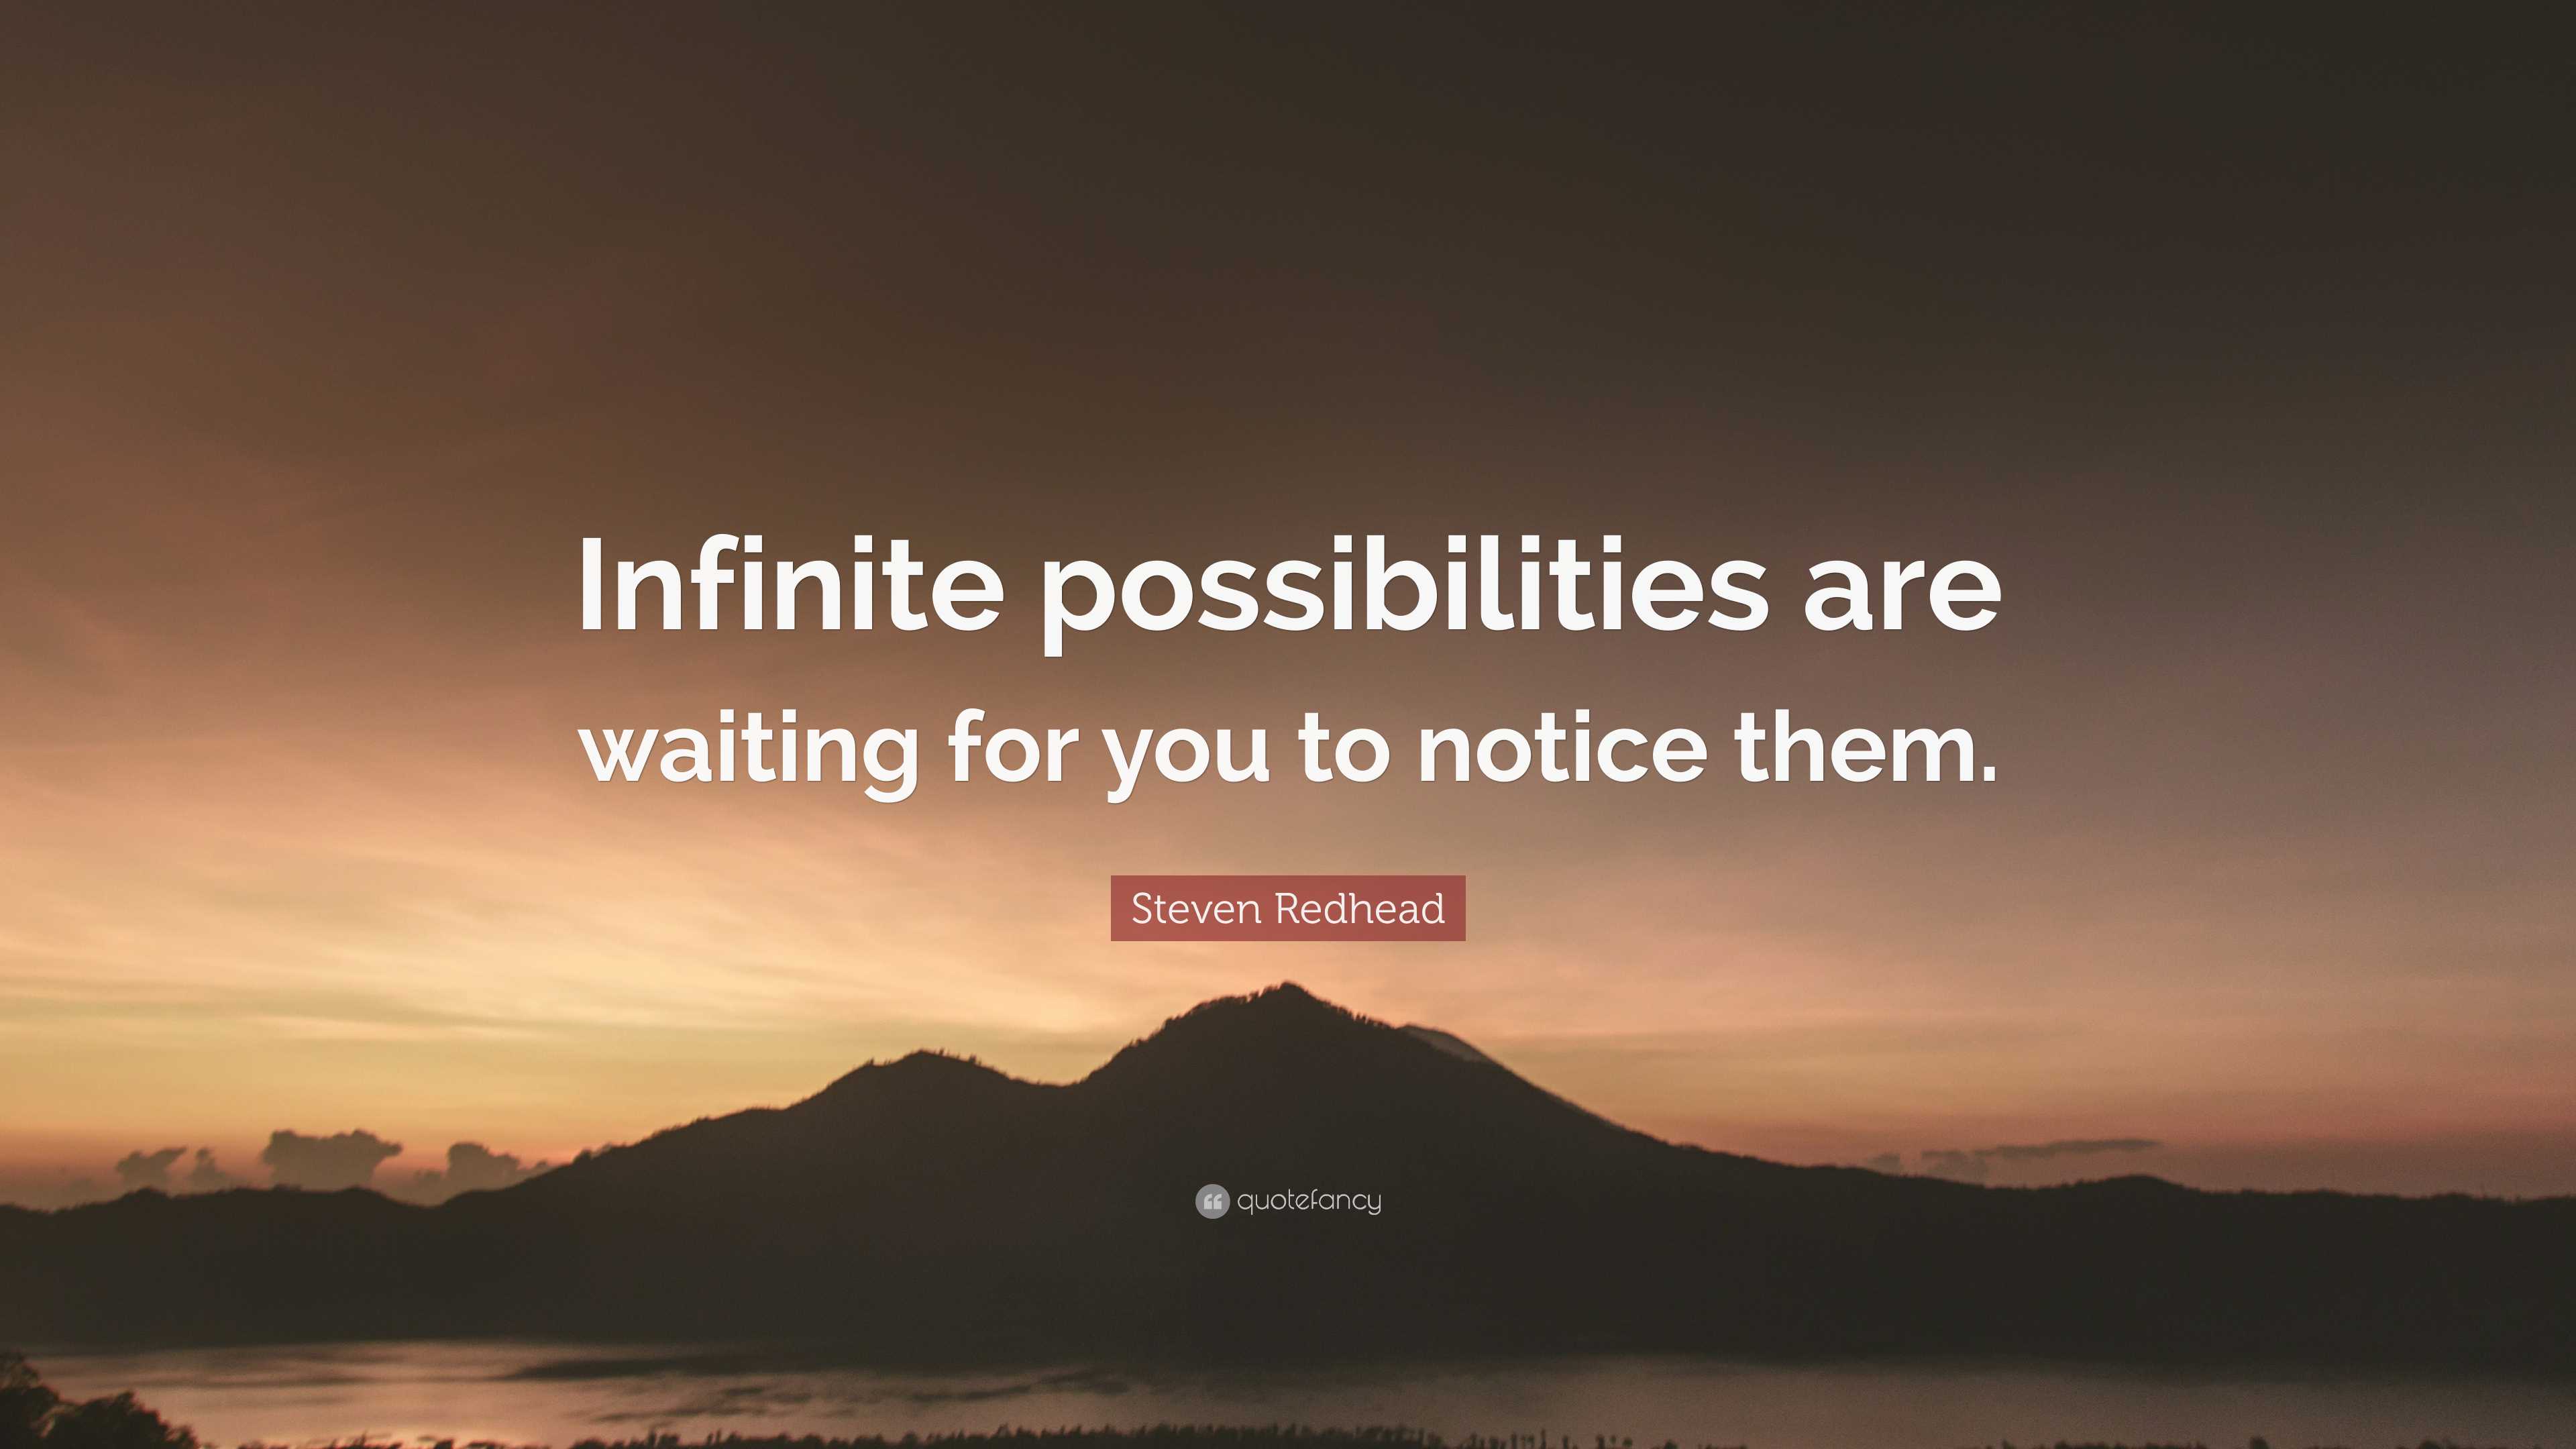 https://quotefancy.com/media/wallpaper/3840x2160/7751741-Steven-Redhead-Quote-Infinite-possibilities-are-waiting-for-you-to.jpg